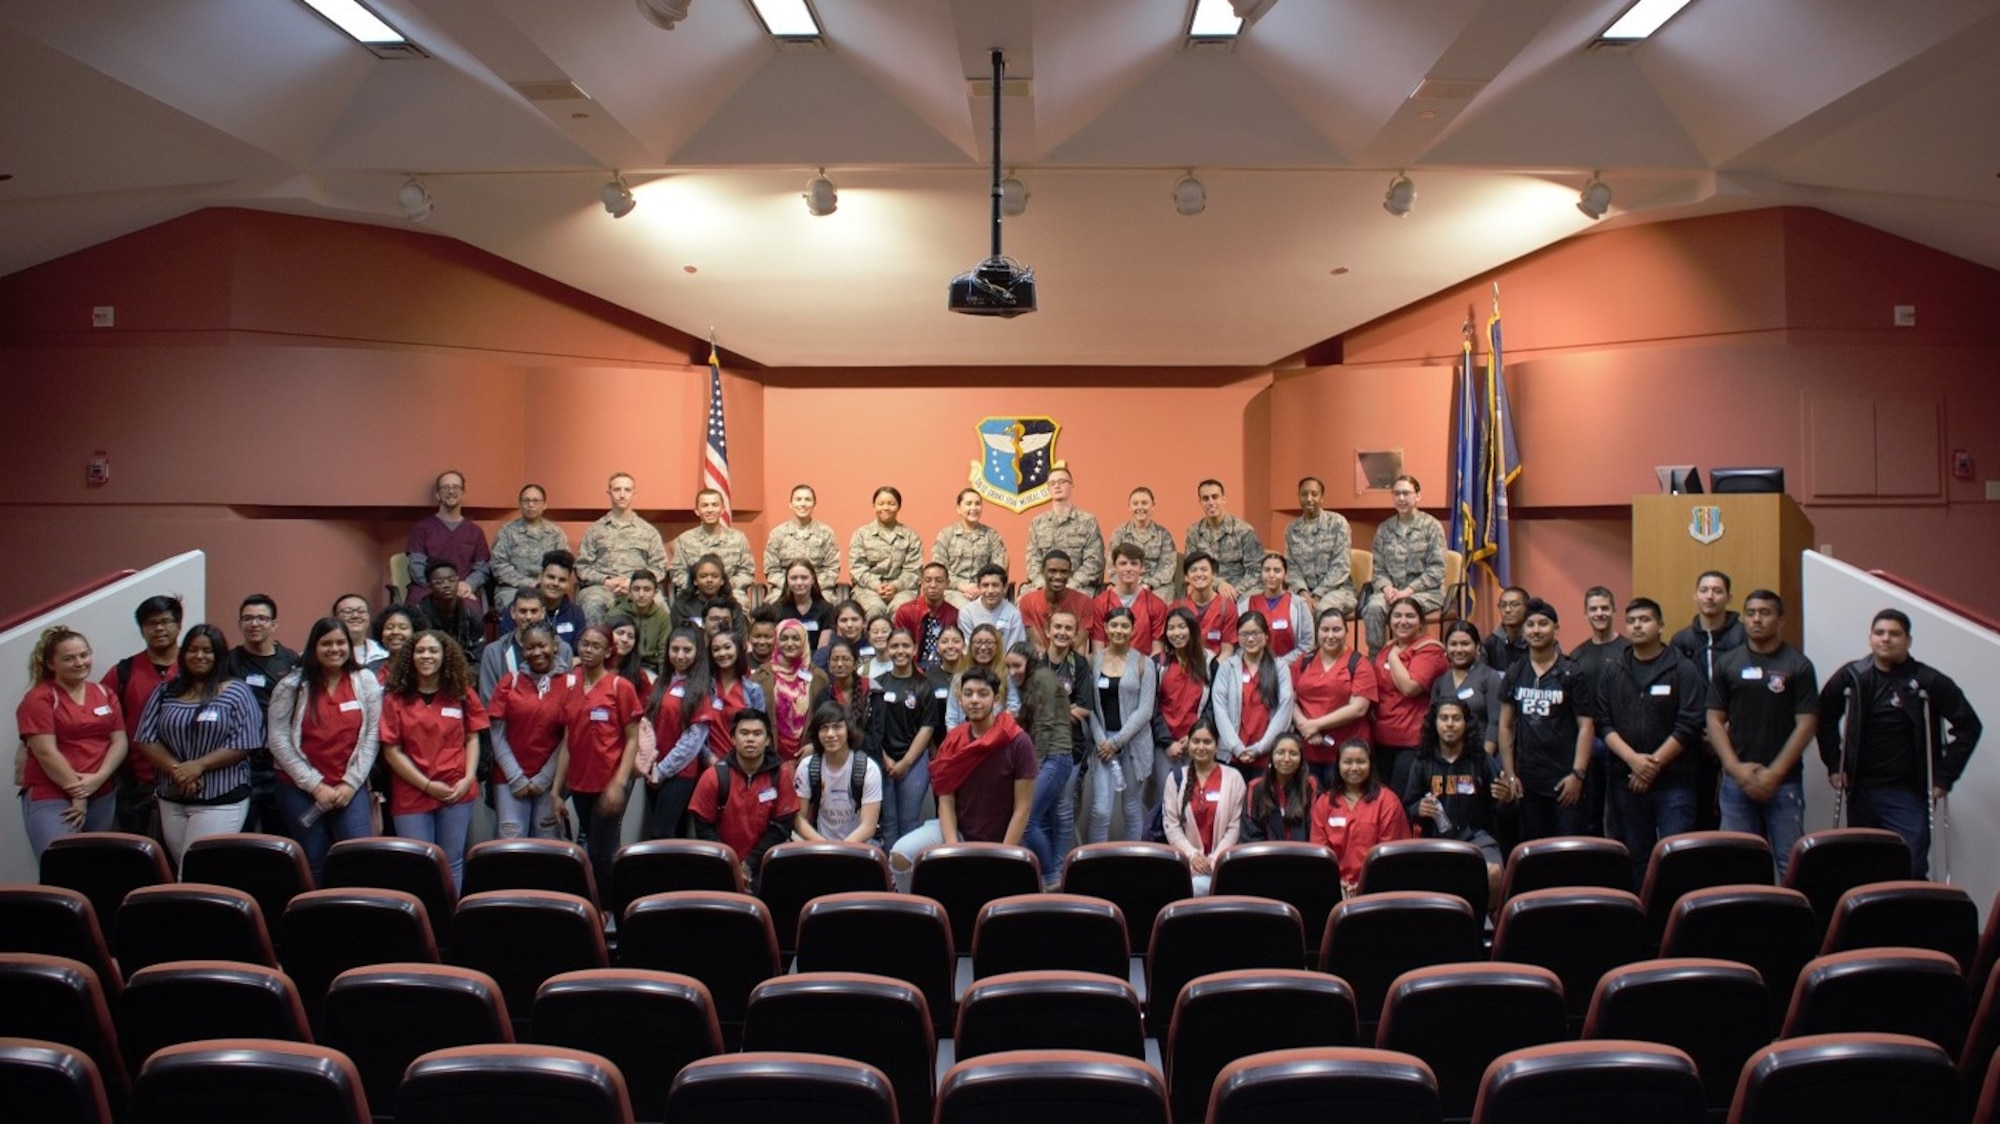 Students from De Anza High School pose for a picture in the David Grant USAF Medical Center auditorium March 29 at Travis Air Force Base, Calif.